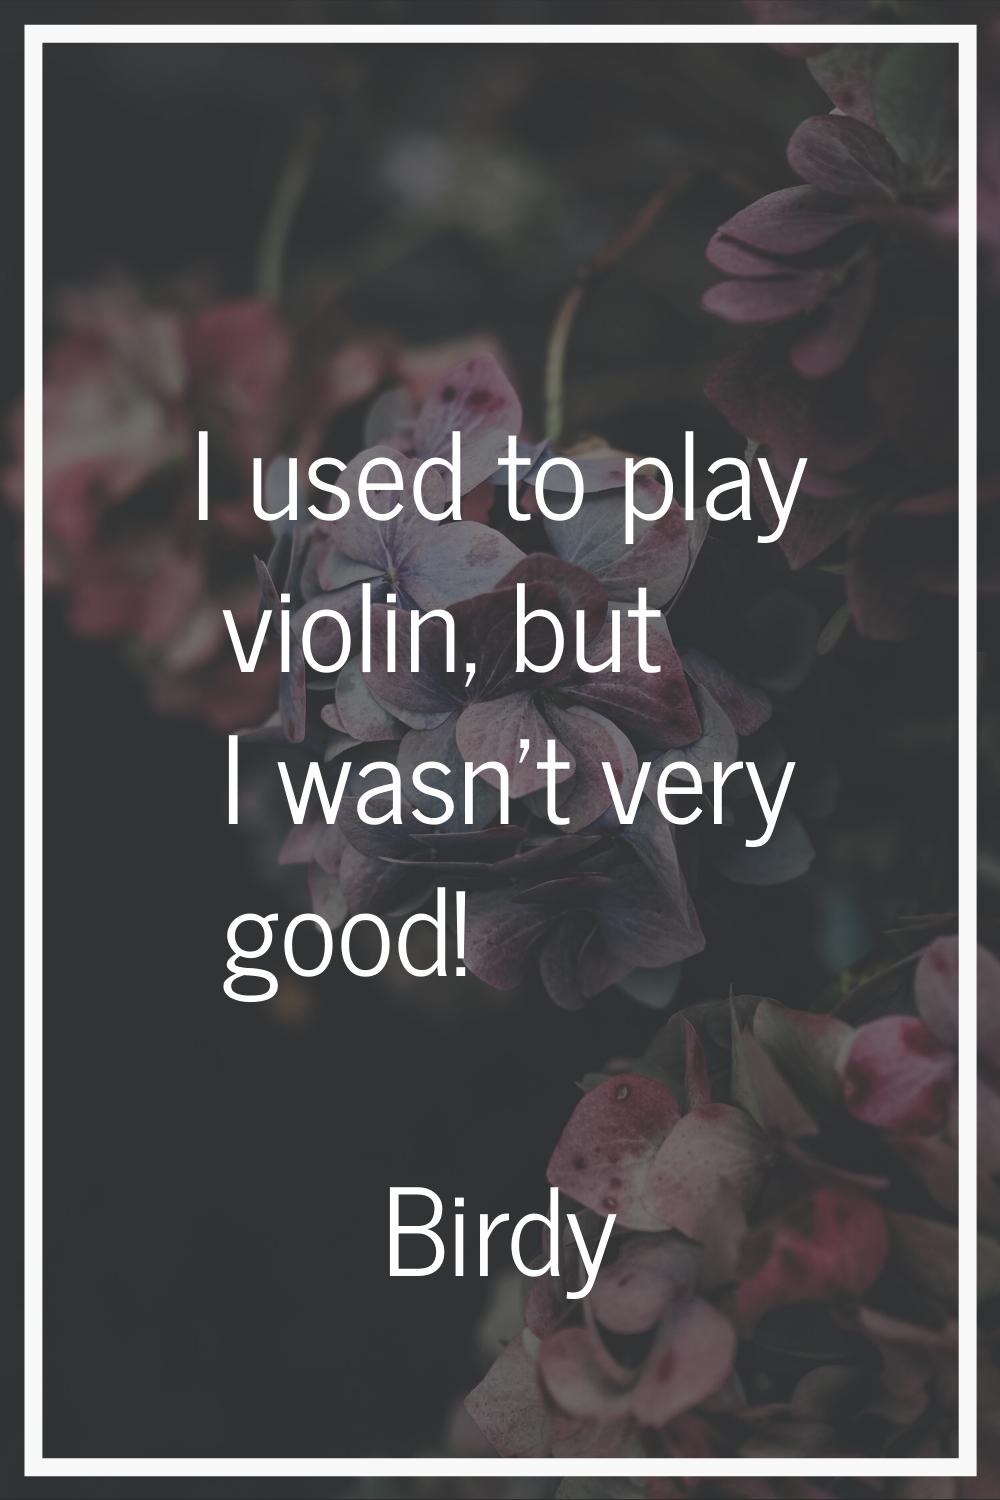 I used to play violin, but I wasn't very good!